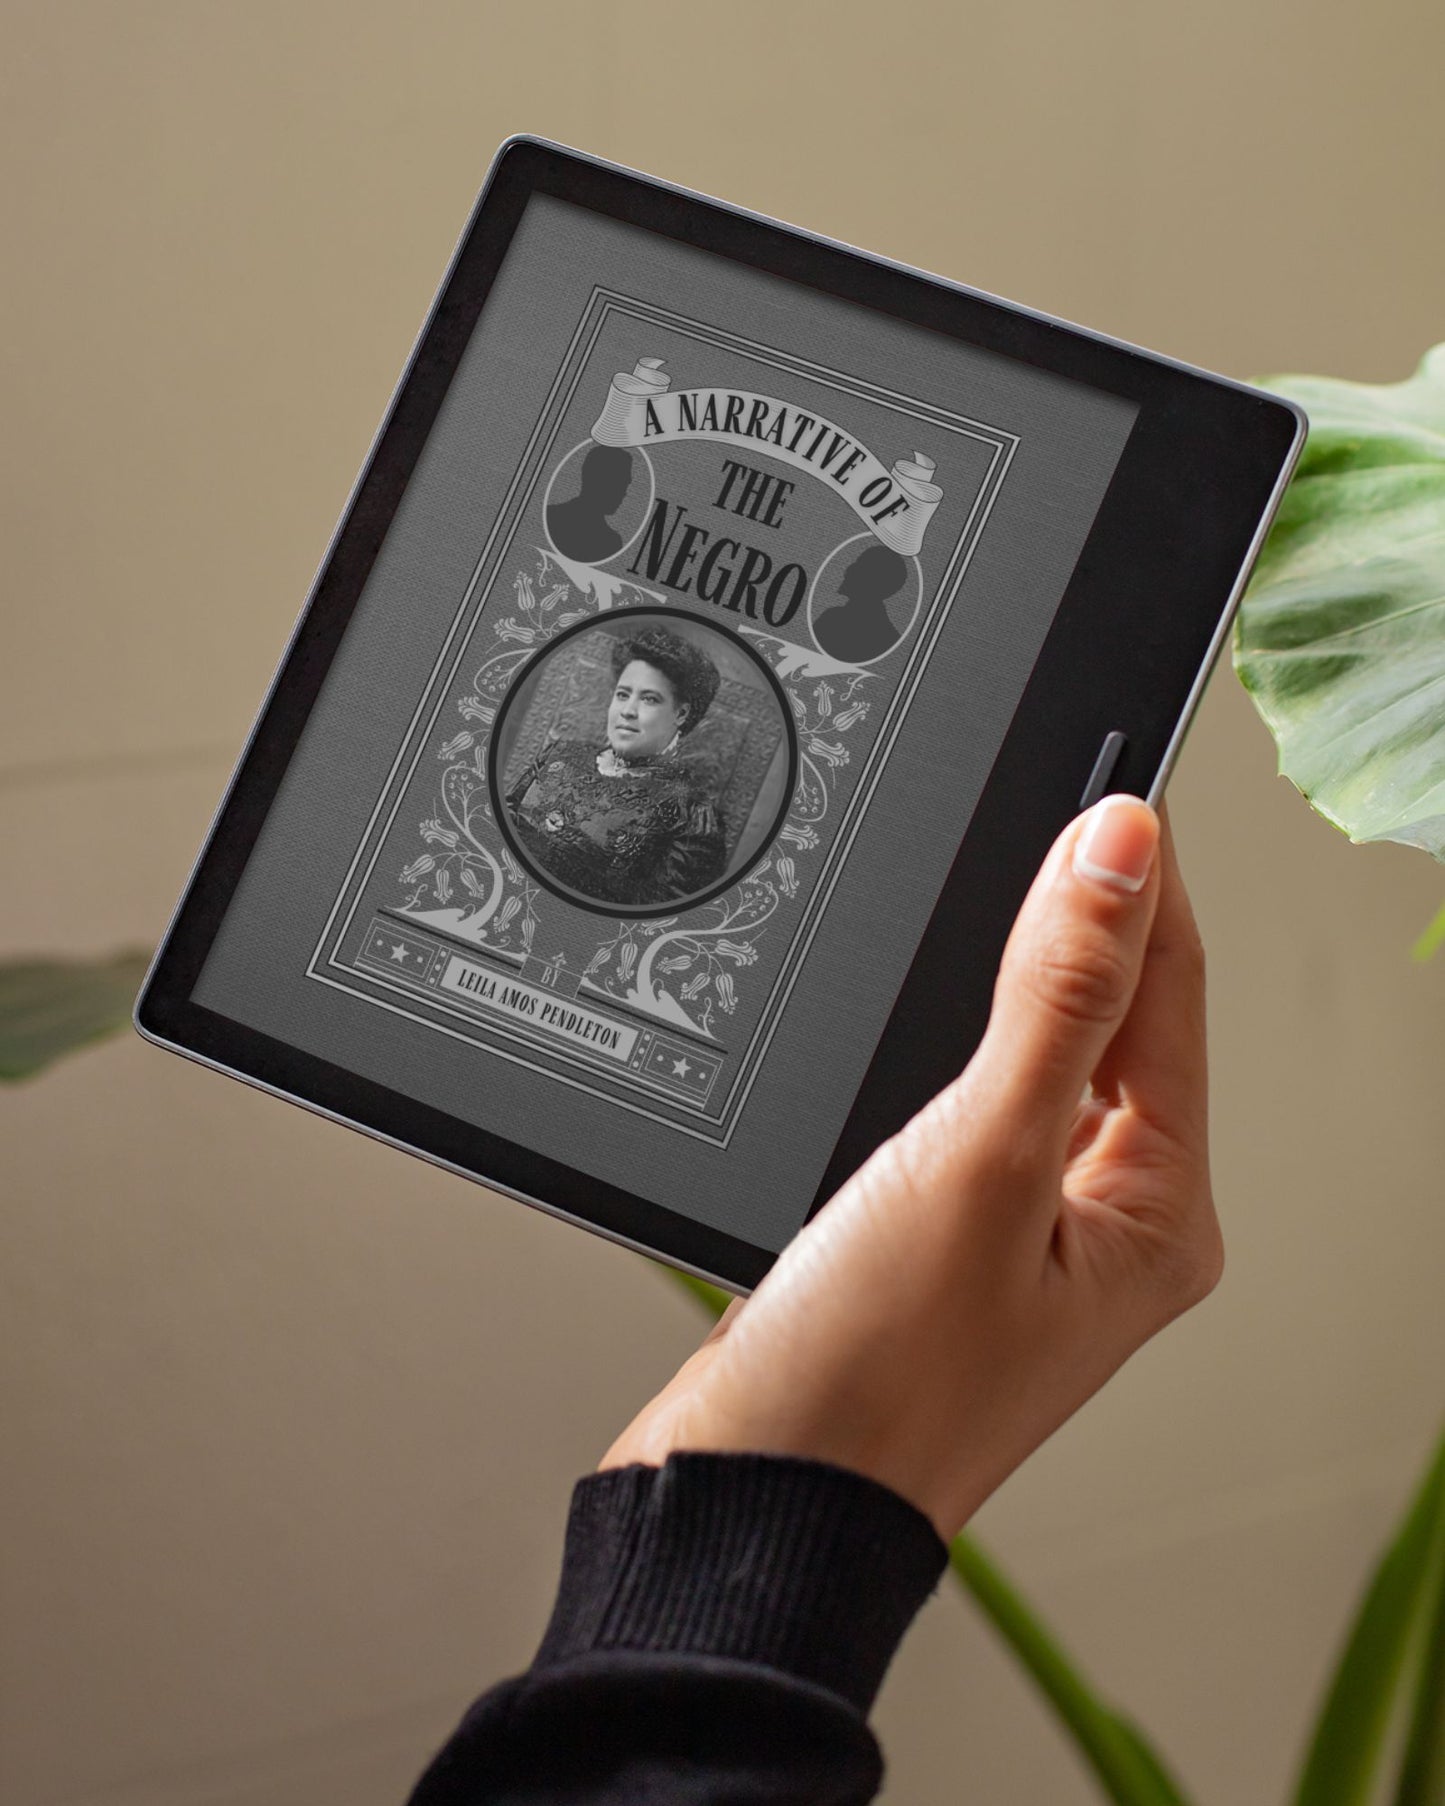 A greyscale image of the ebook A Narrative of the Negro held by a white woman's hand in front of a green plant.